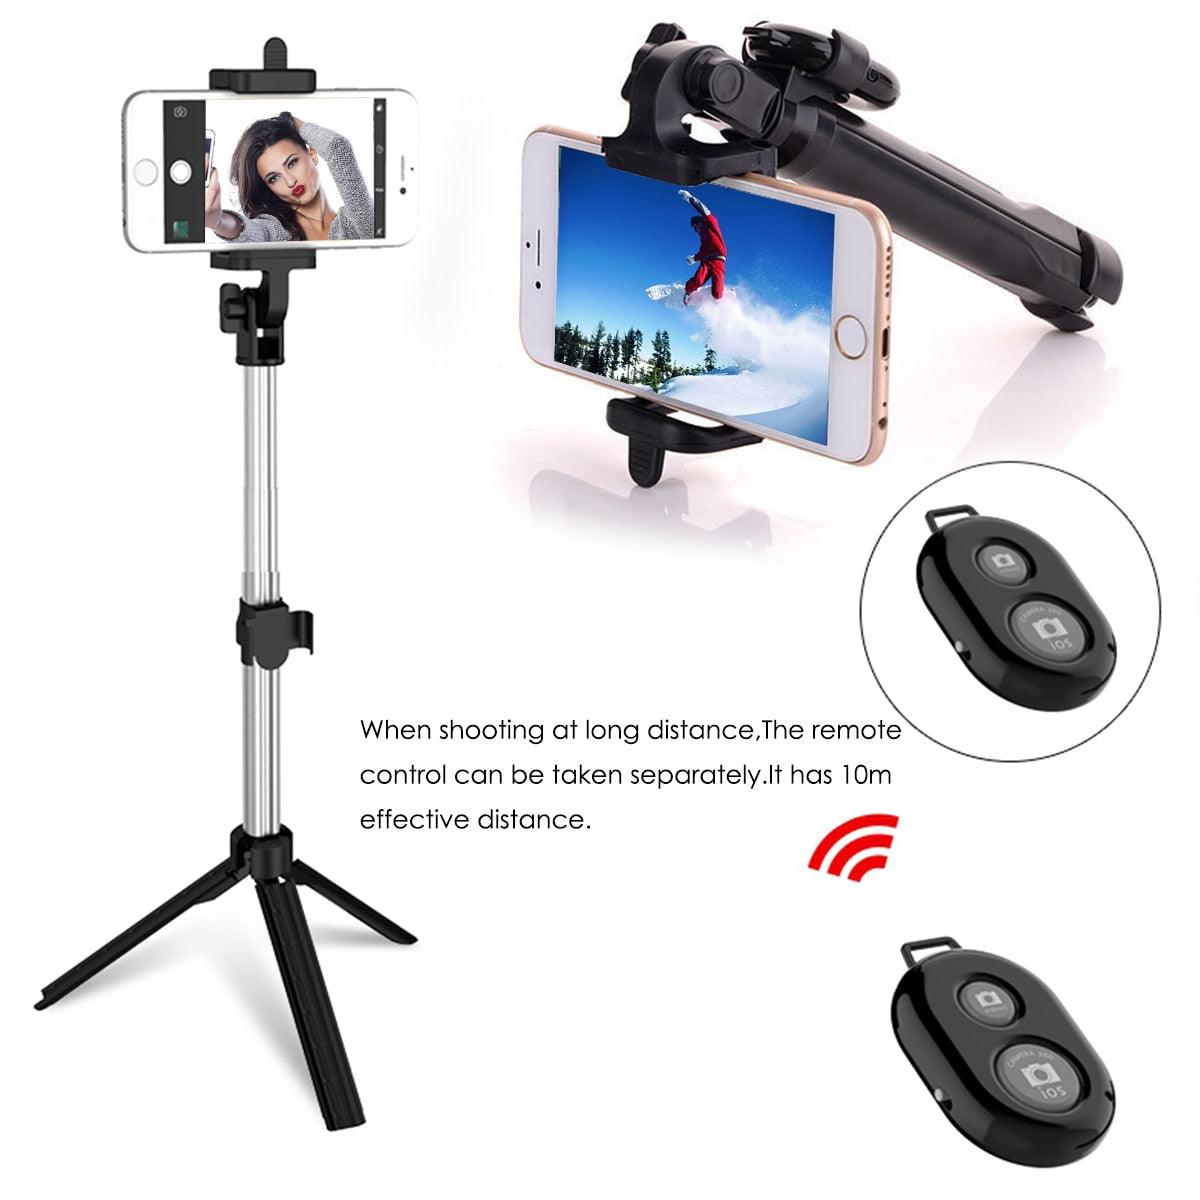 3 In 1 Wireless BT Selfie Stick Foldable Tripod Expandable Monopod Remote Shutter Handheld Selfie Stick For iPhone IOS Android (RS)(1U50)